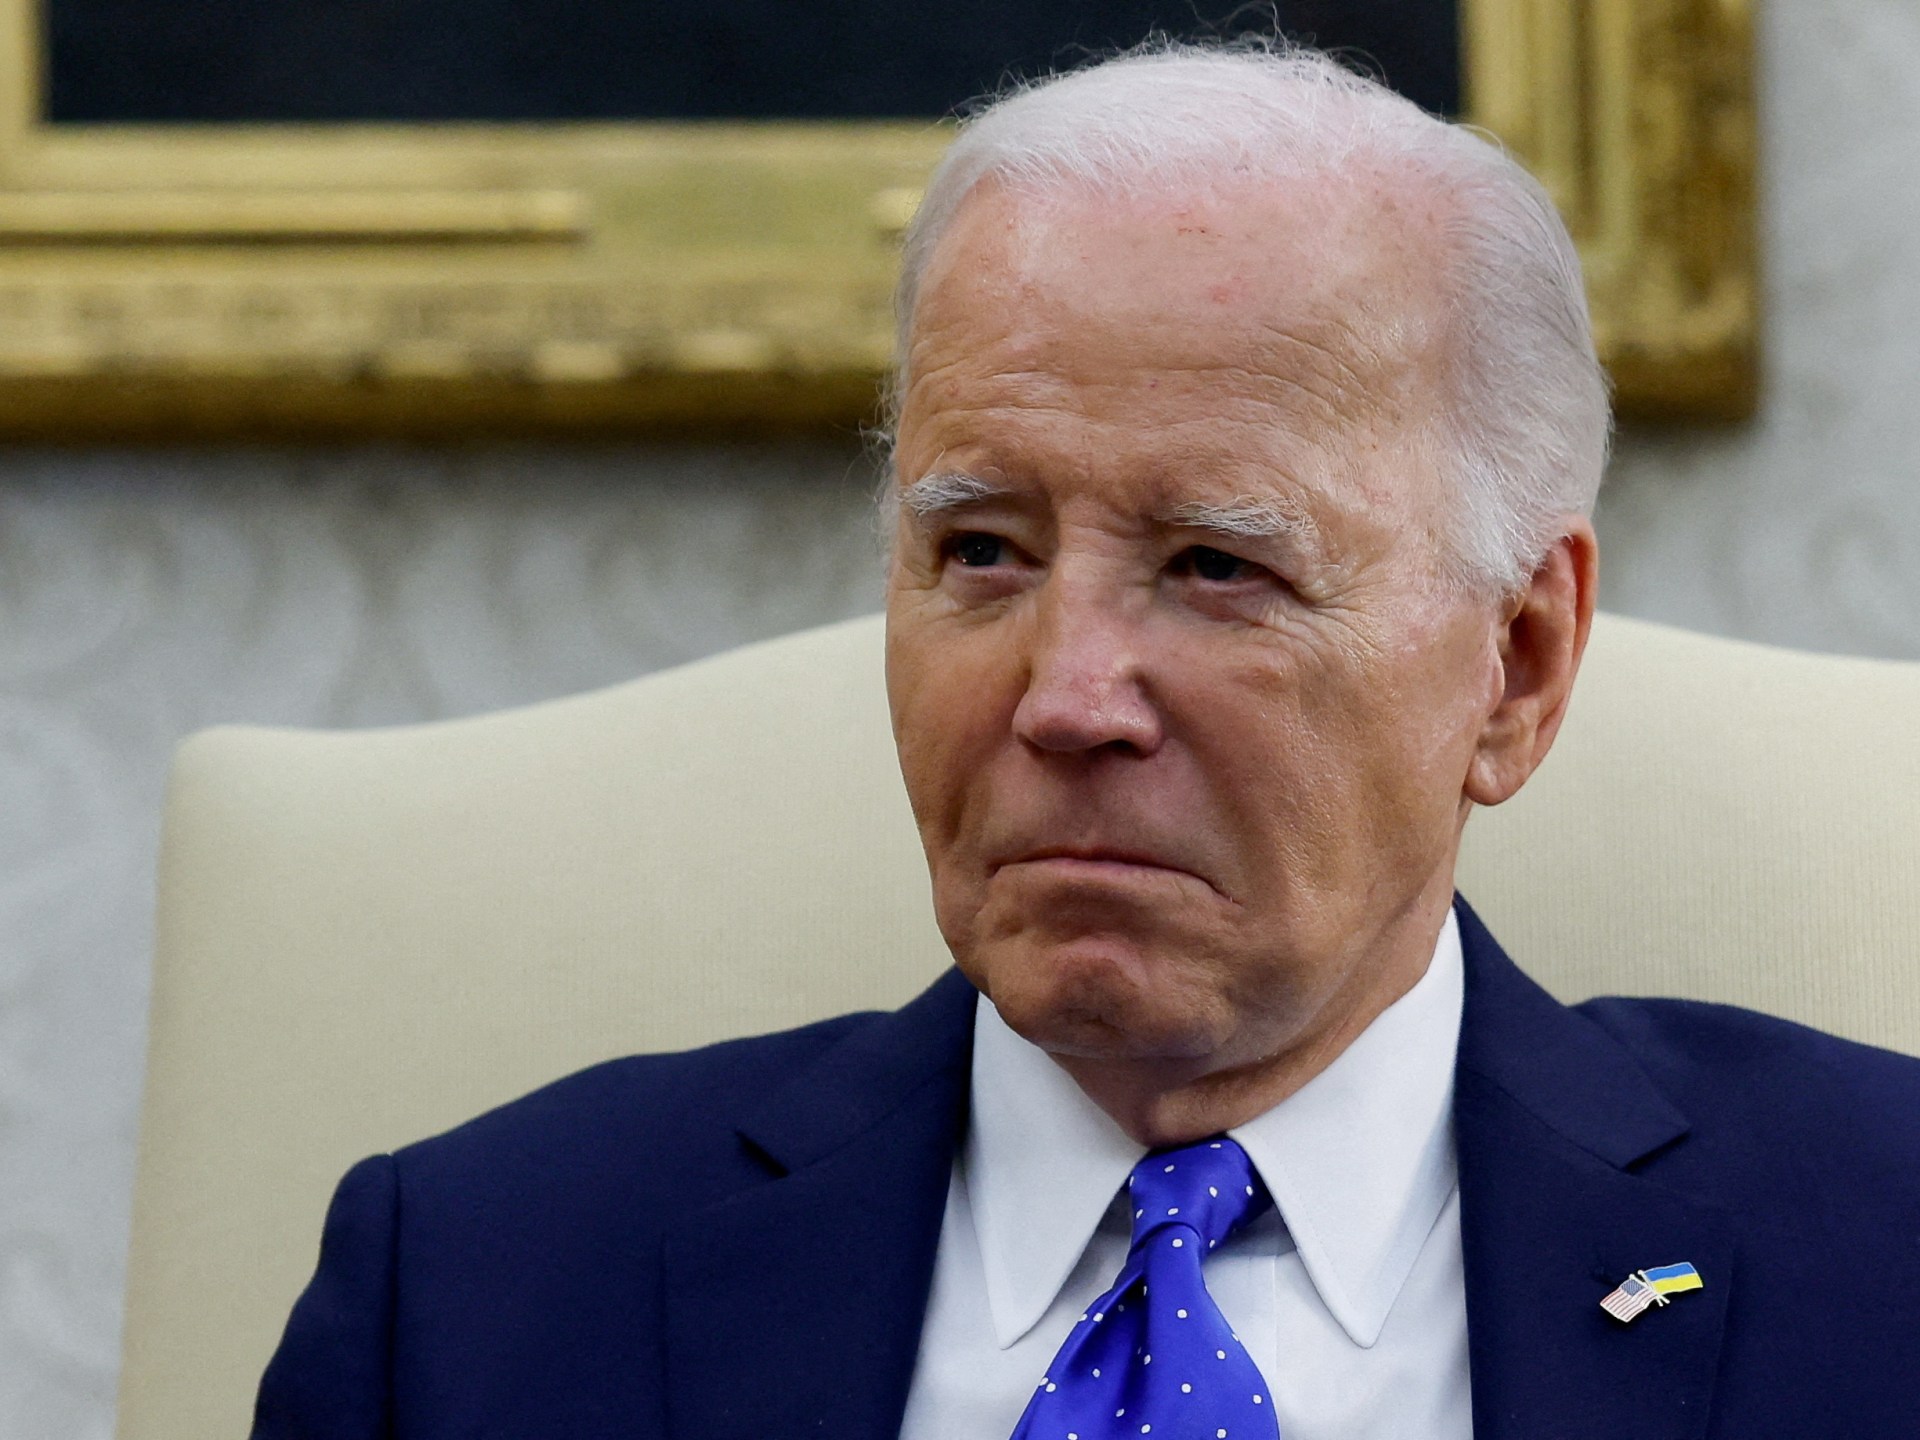 Biden’s frustrations with Netanyahu ‘meaningless’ without action: Analysts